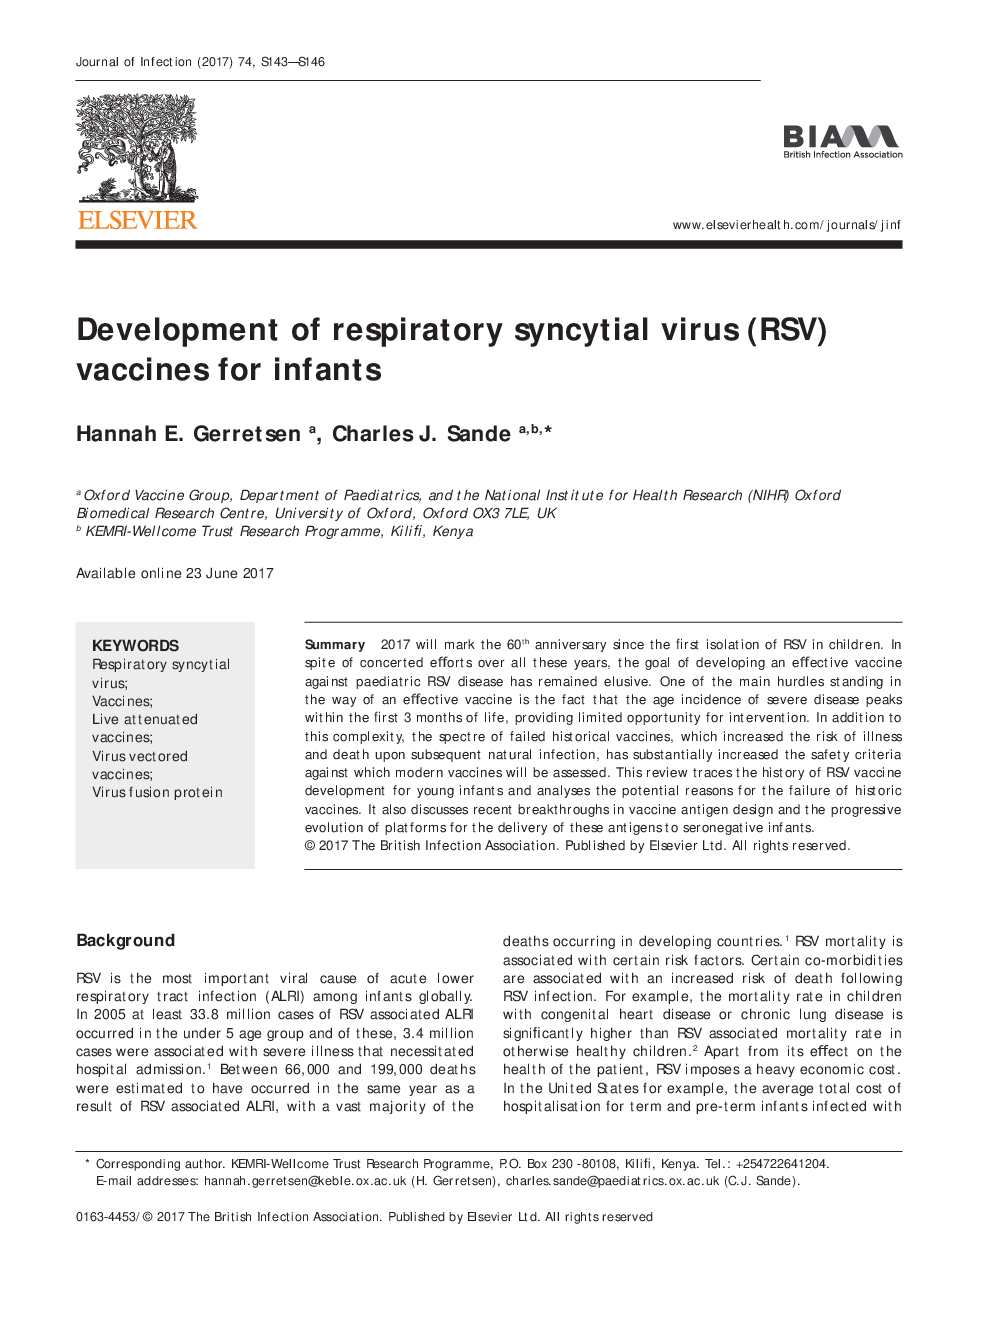 Development of respiratory syncytial virus (RSV) vaccines for infants